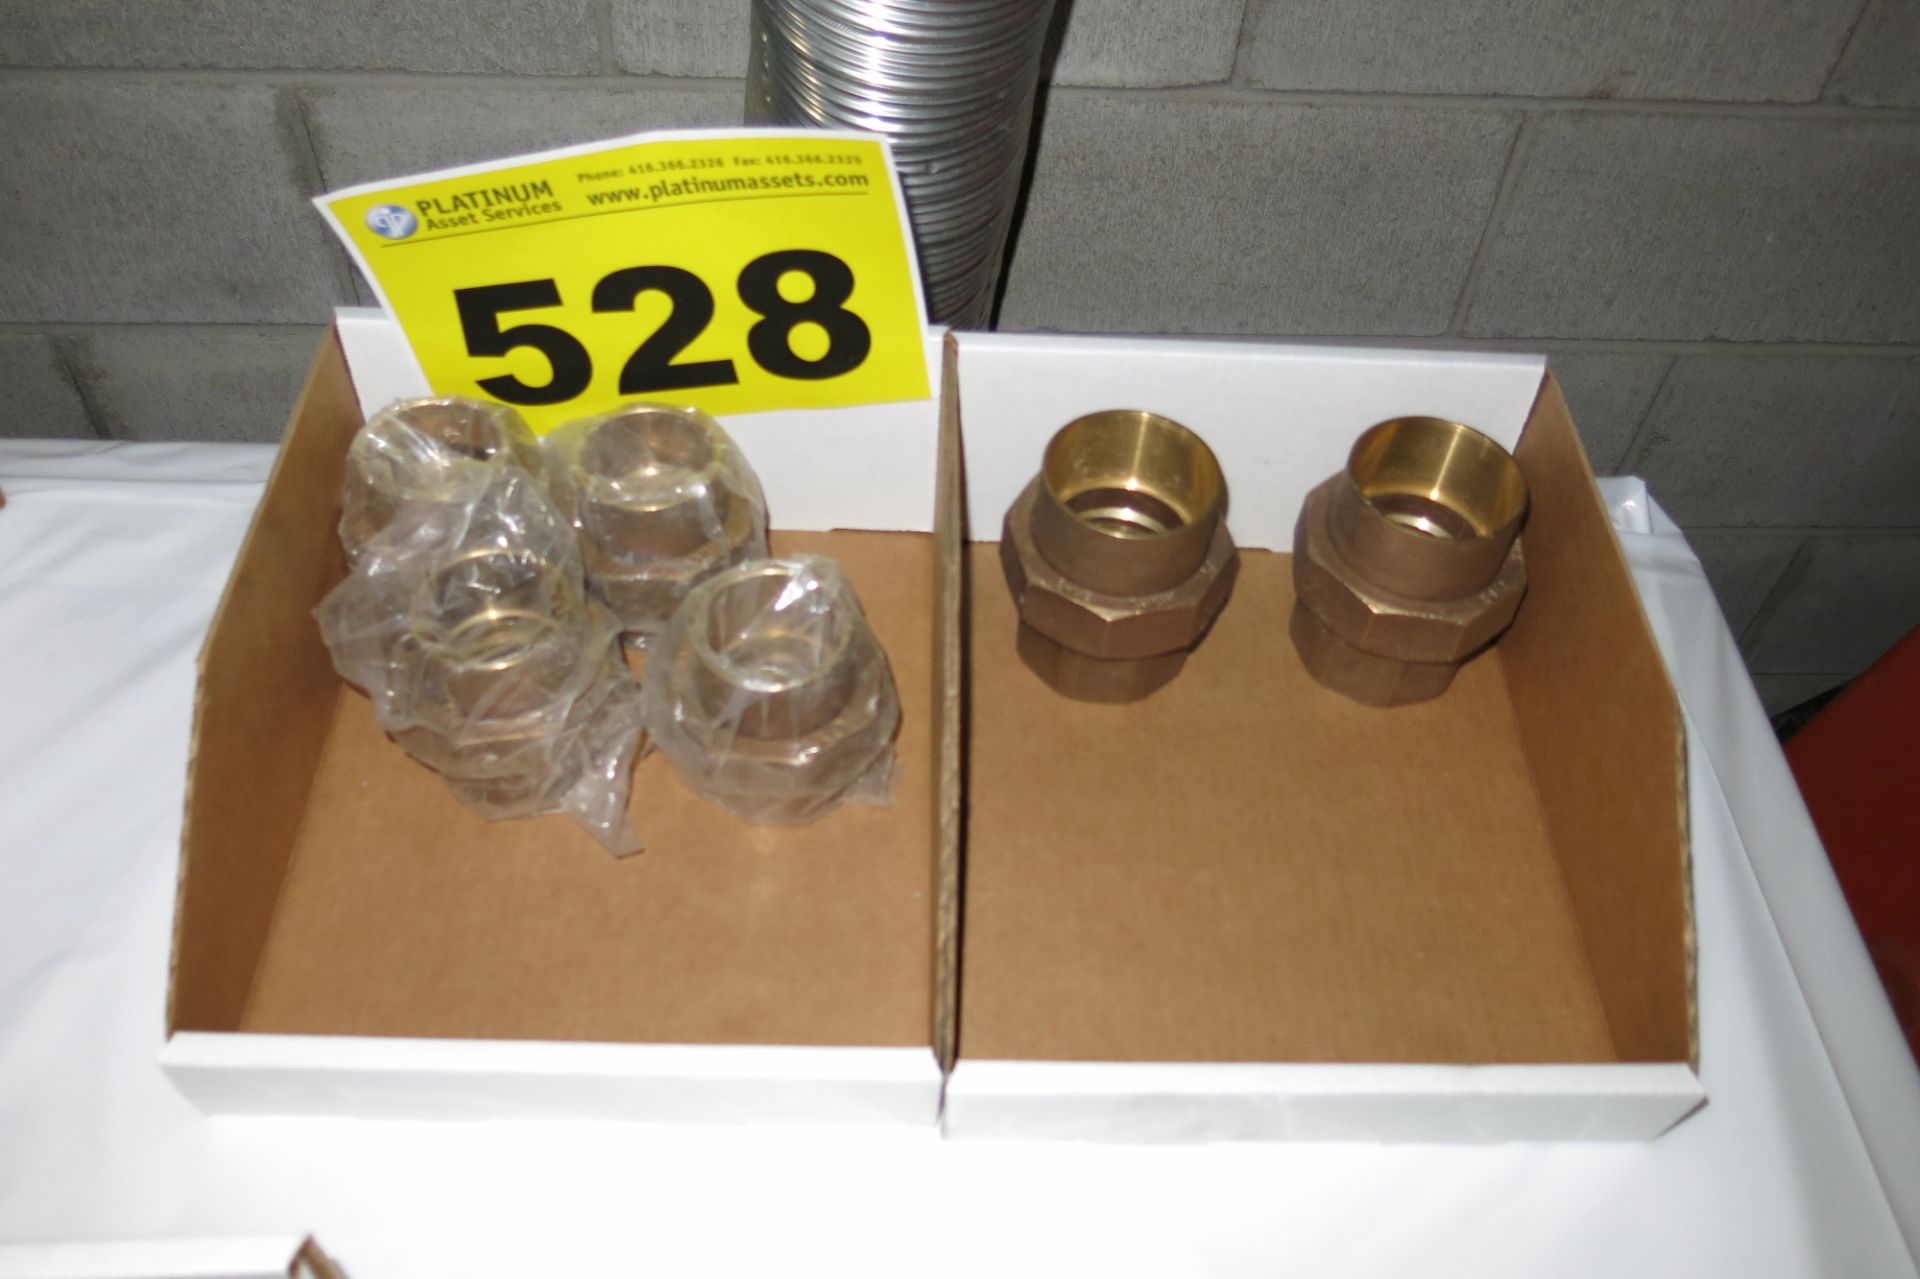 LOT OF COPPER PIPE CONNECTORS - NEW (LOCATED IN MISSISSAUGA)